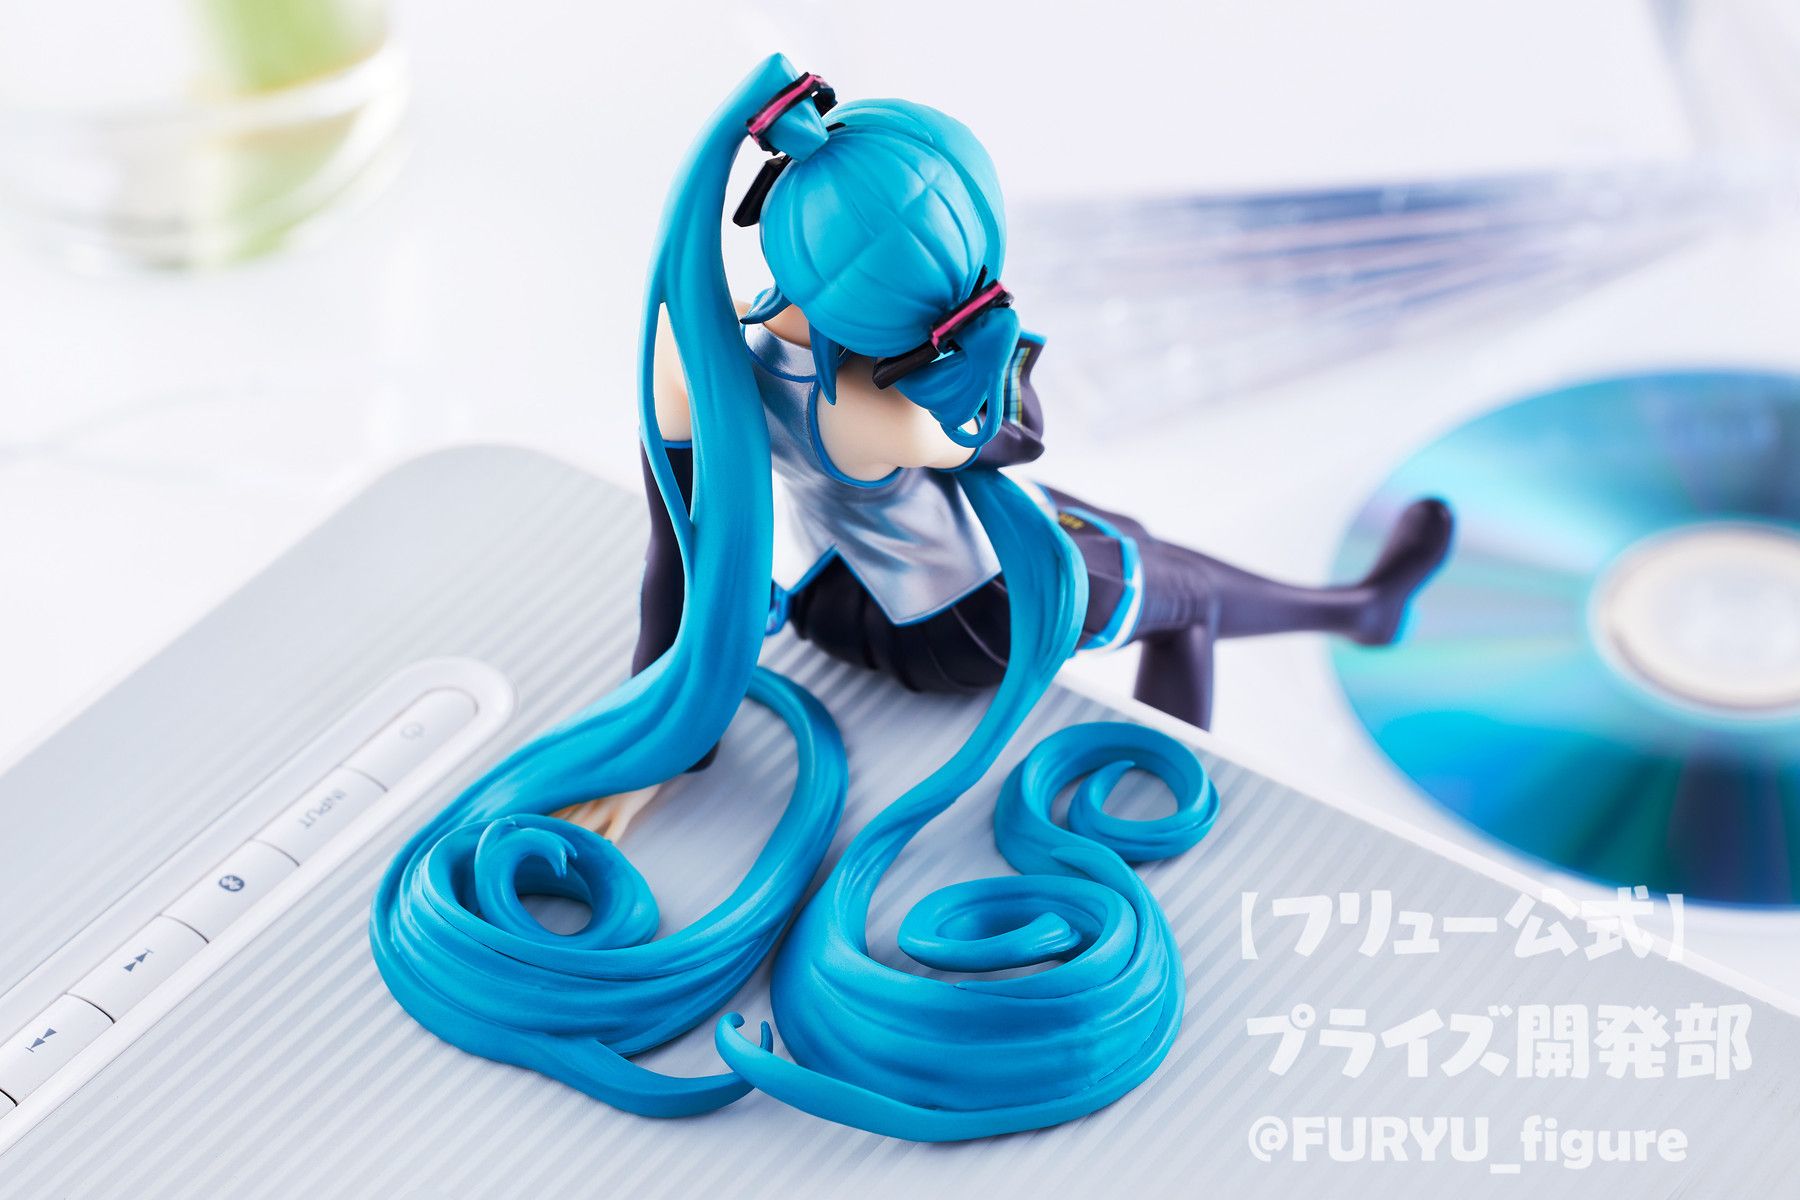 [Hatsune Miku] Nuyoru Stopper Figure, too much color and become a topic erotic 8